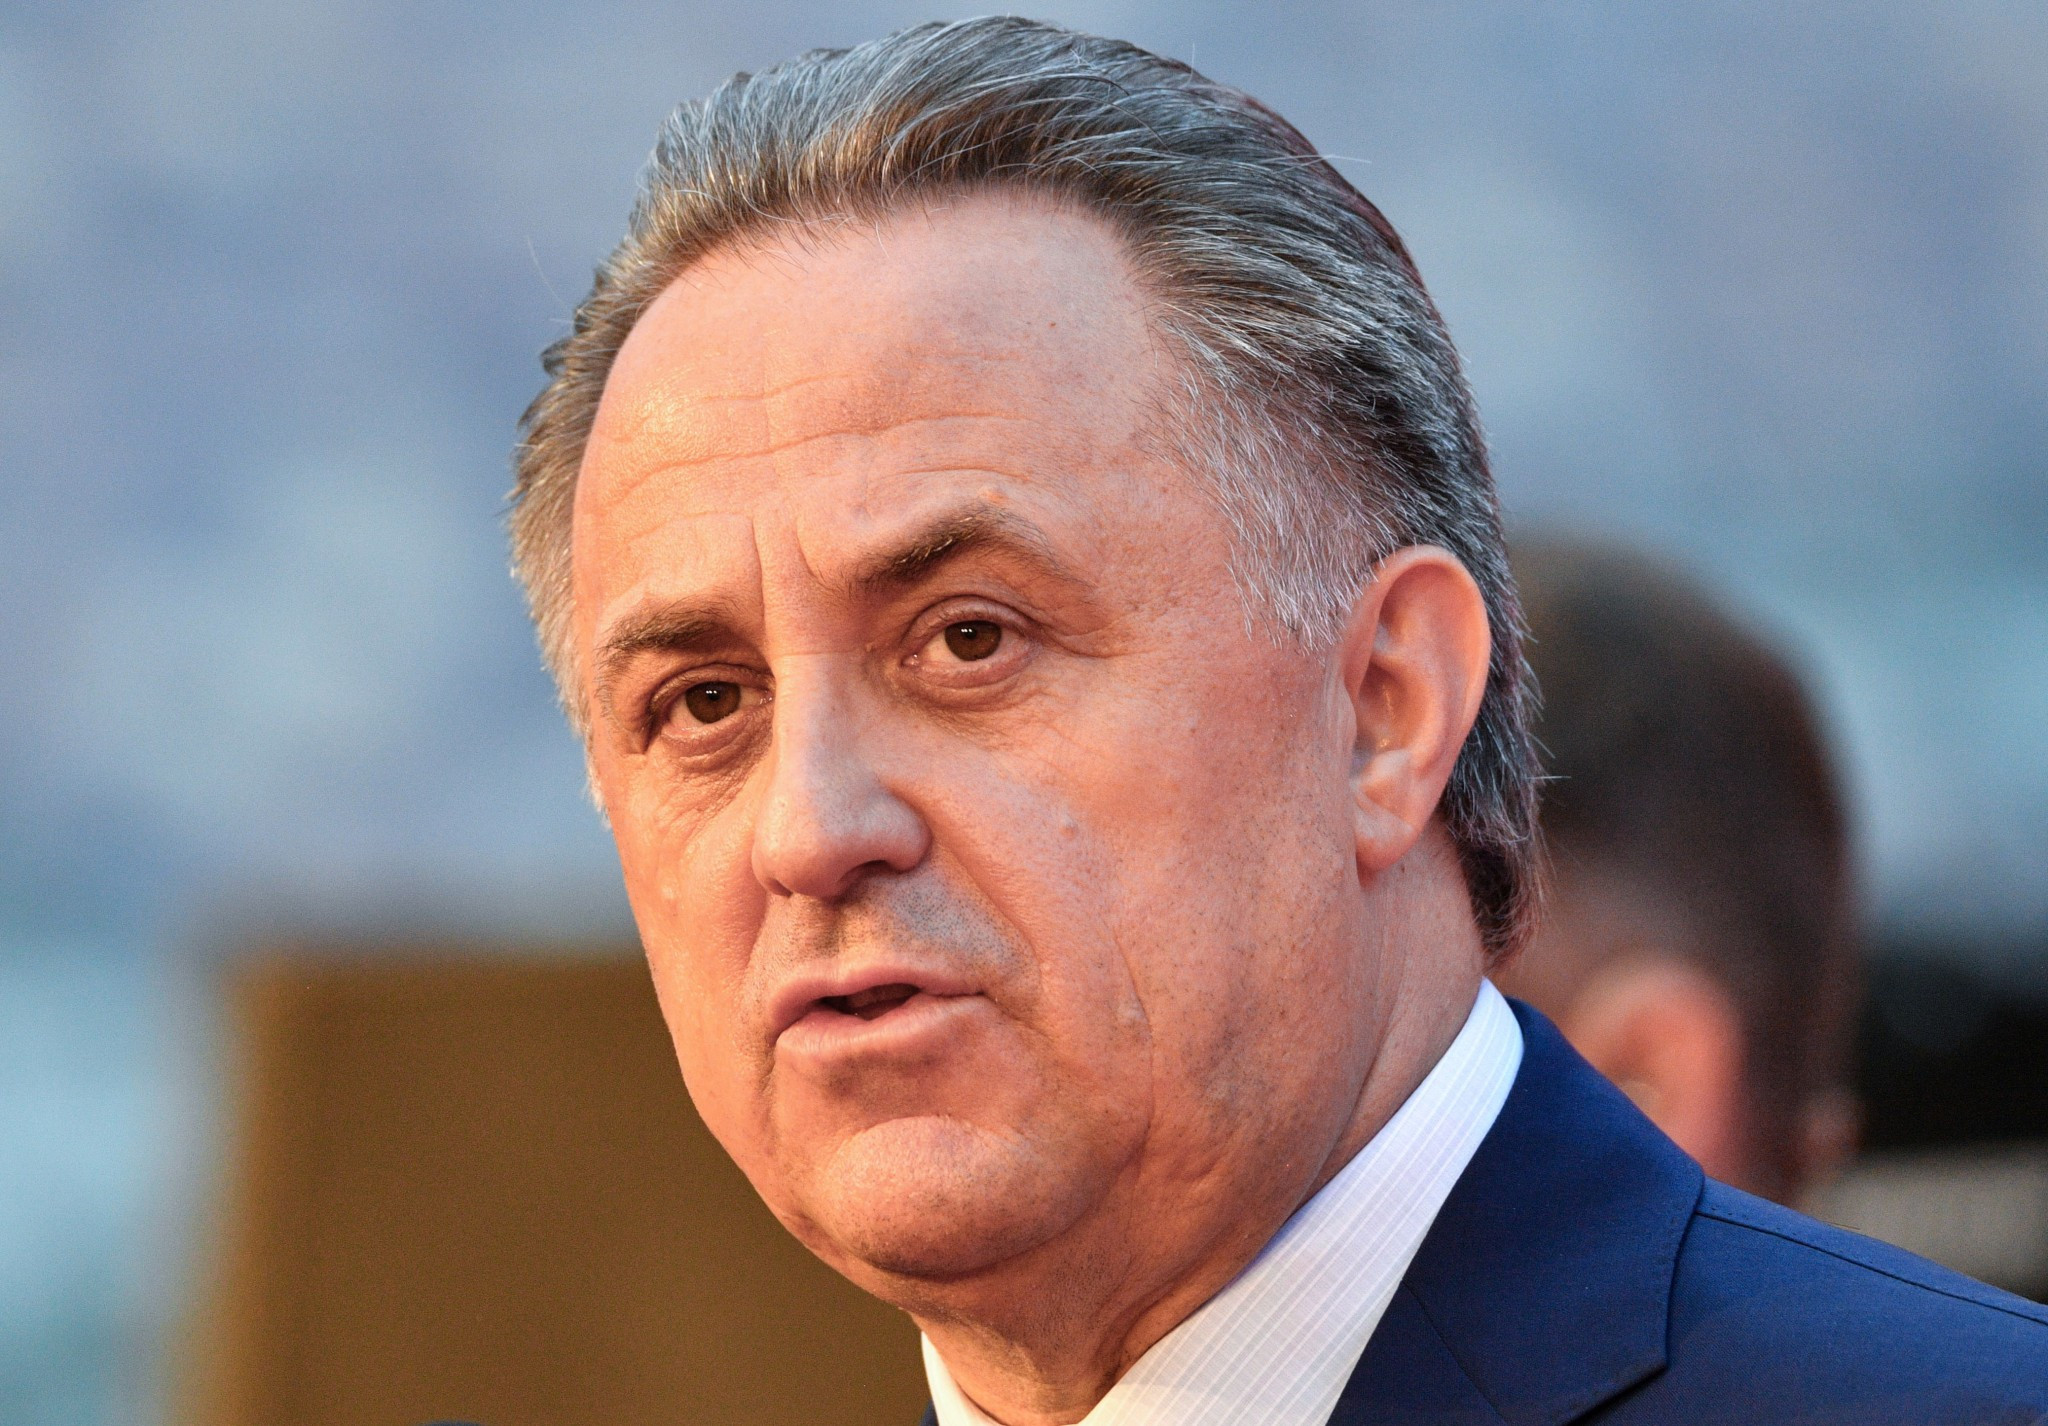 Vitaly Mutko has claimed almost all of the issues blocking RUSADA's compliance have been resolved ©Getty Images